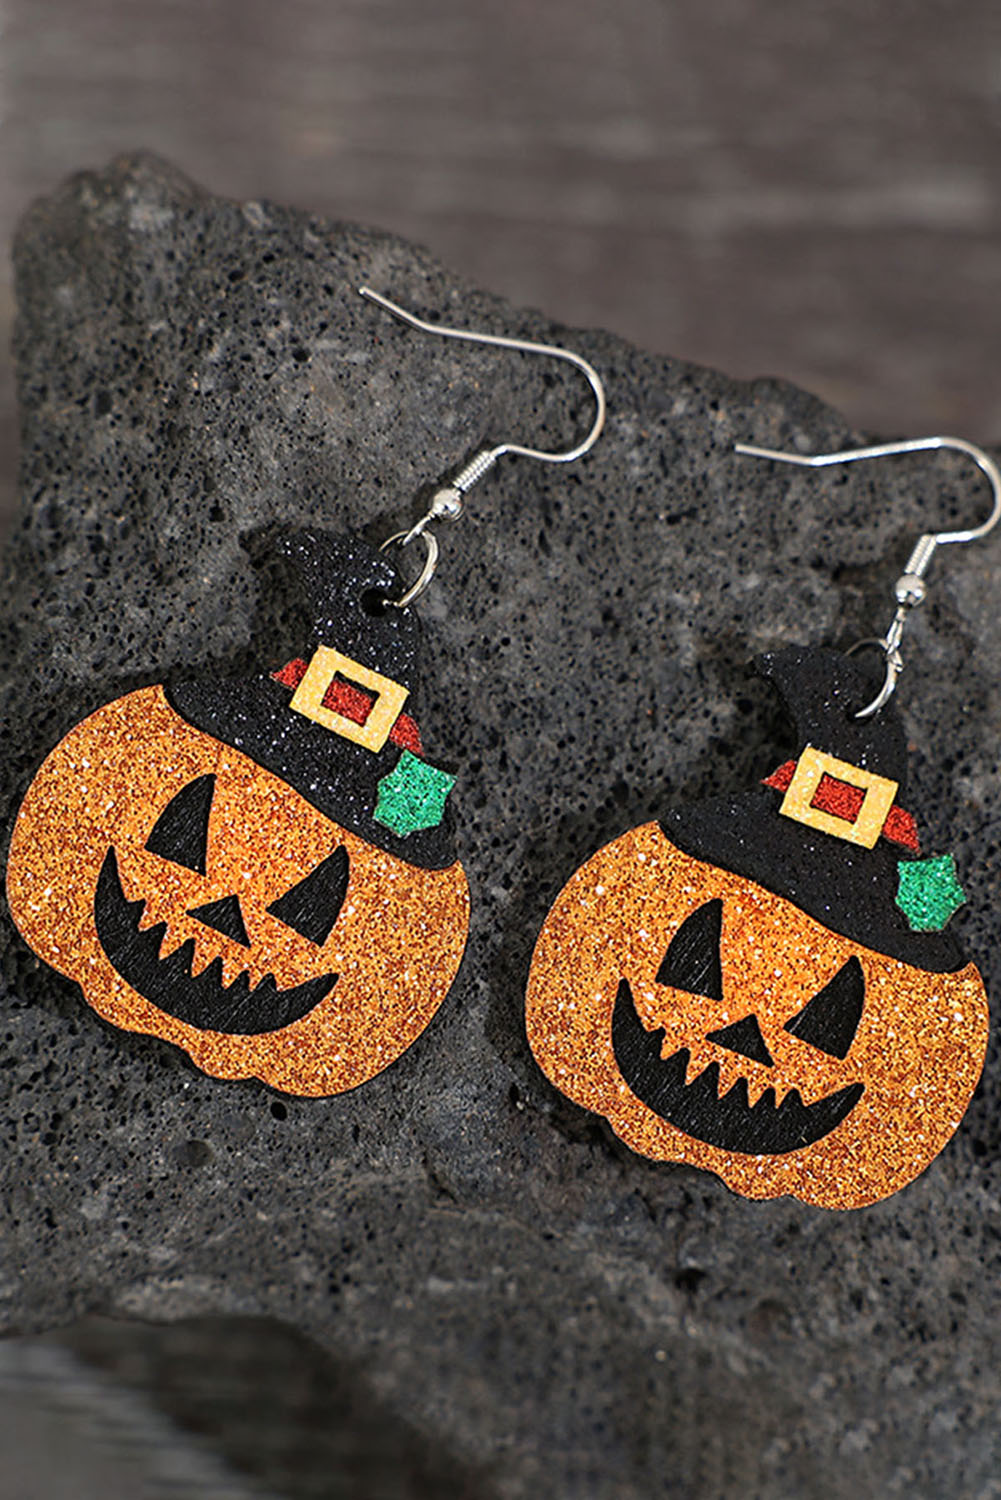 - Multicolour Halloween Animal Print Pumpkin Witch Shape Drop Earrings - various styles - earrings at TFC&H Co.